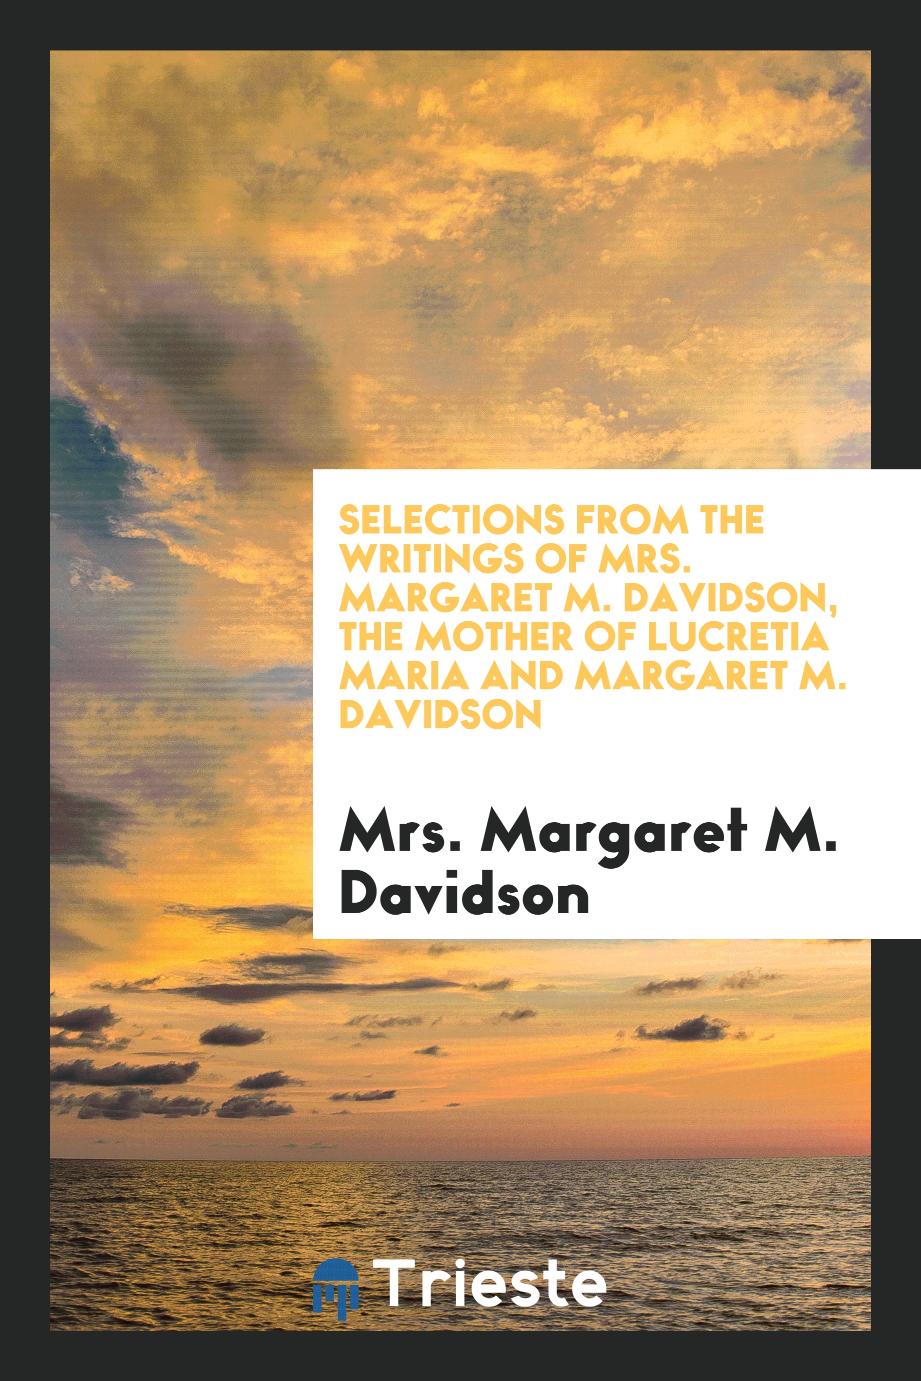 Selections from the writings of Mrs. Margaret M. Davidson, the mother of Lucretia Maria and Margaret M. Davidson